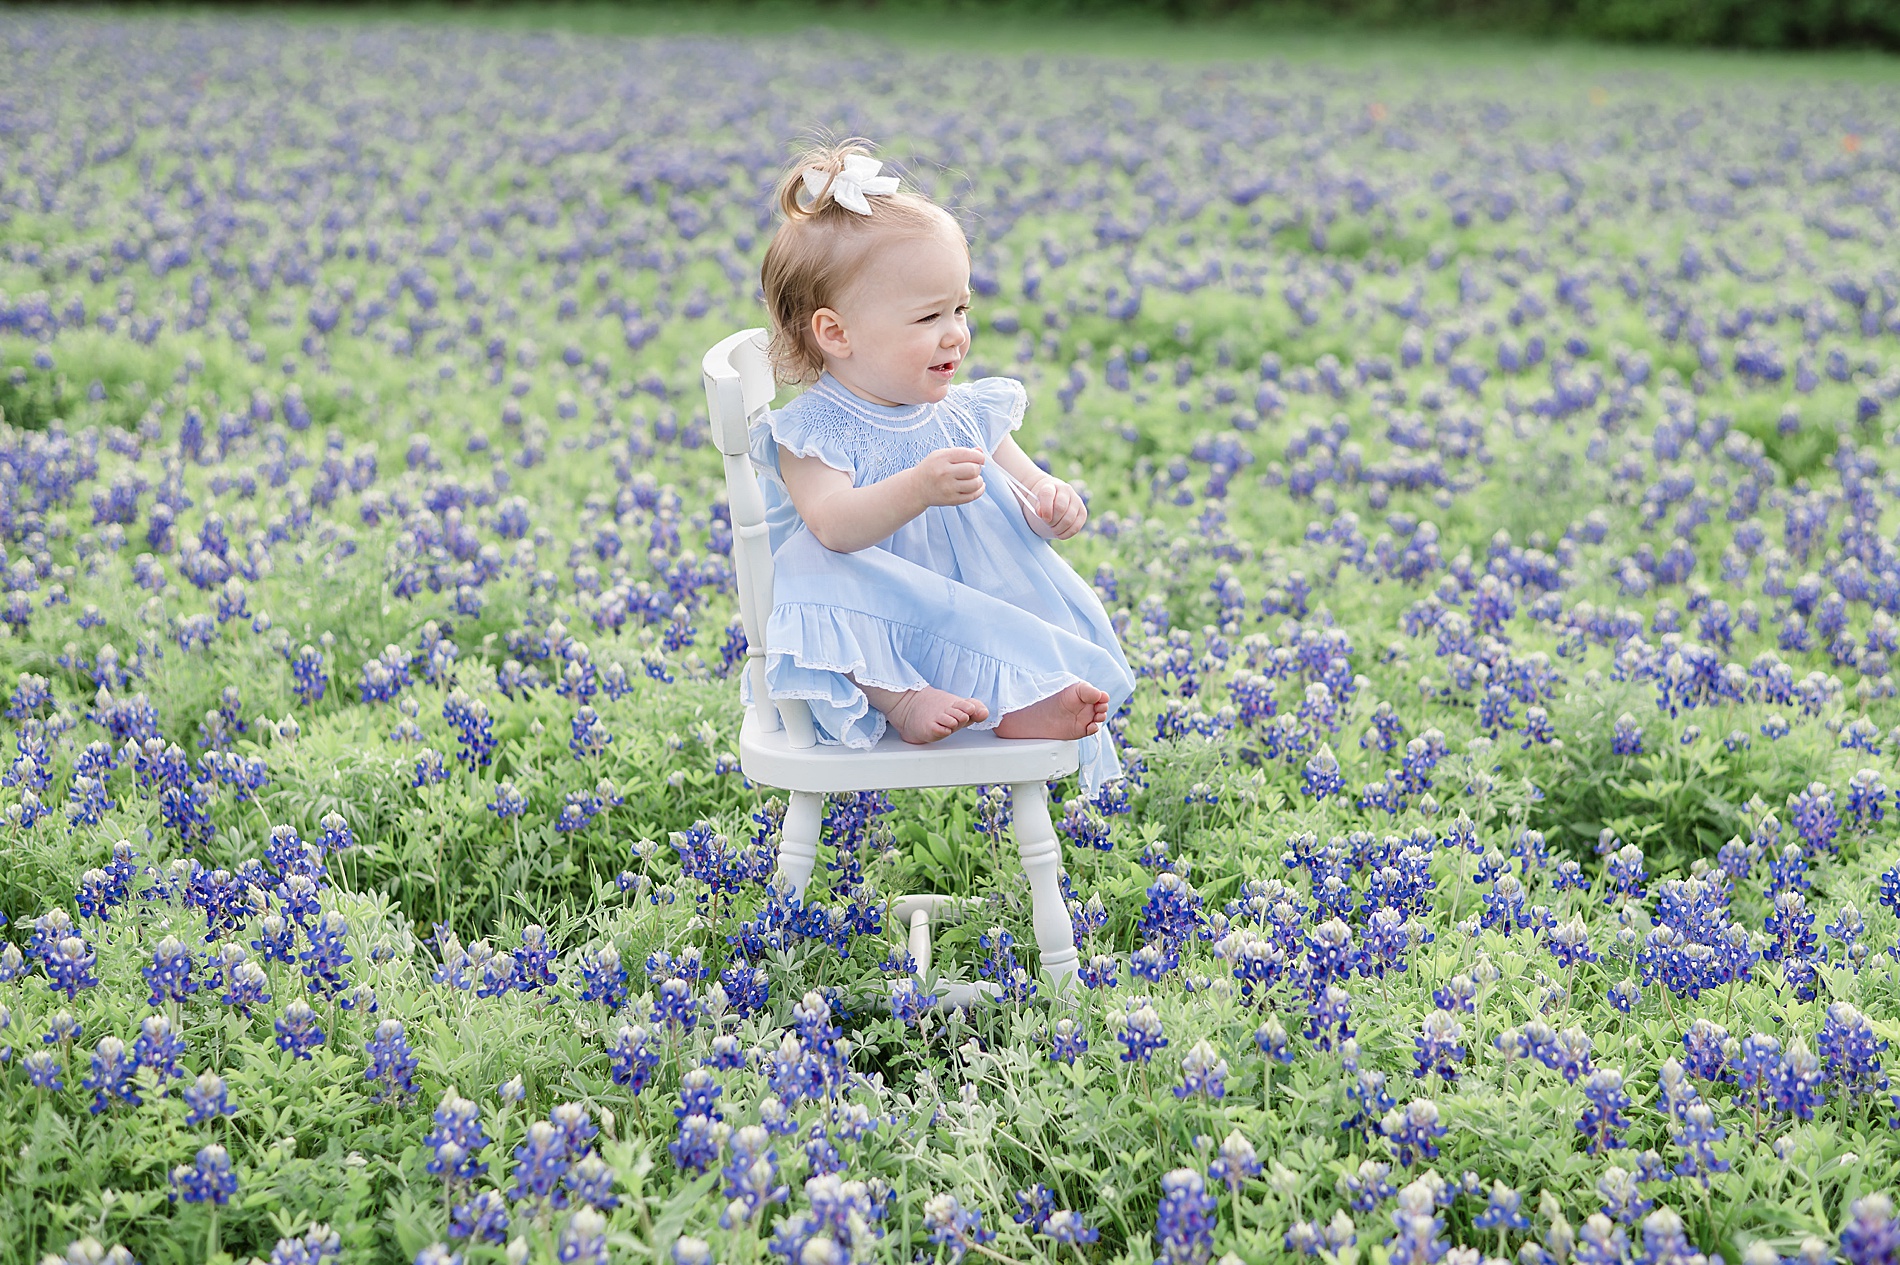 toddler explores field of Bluebonnets in Dallas Texas photographed by Lindsey Dutton Photography, a Dallas family photographer